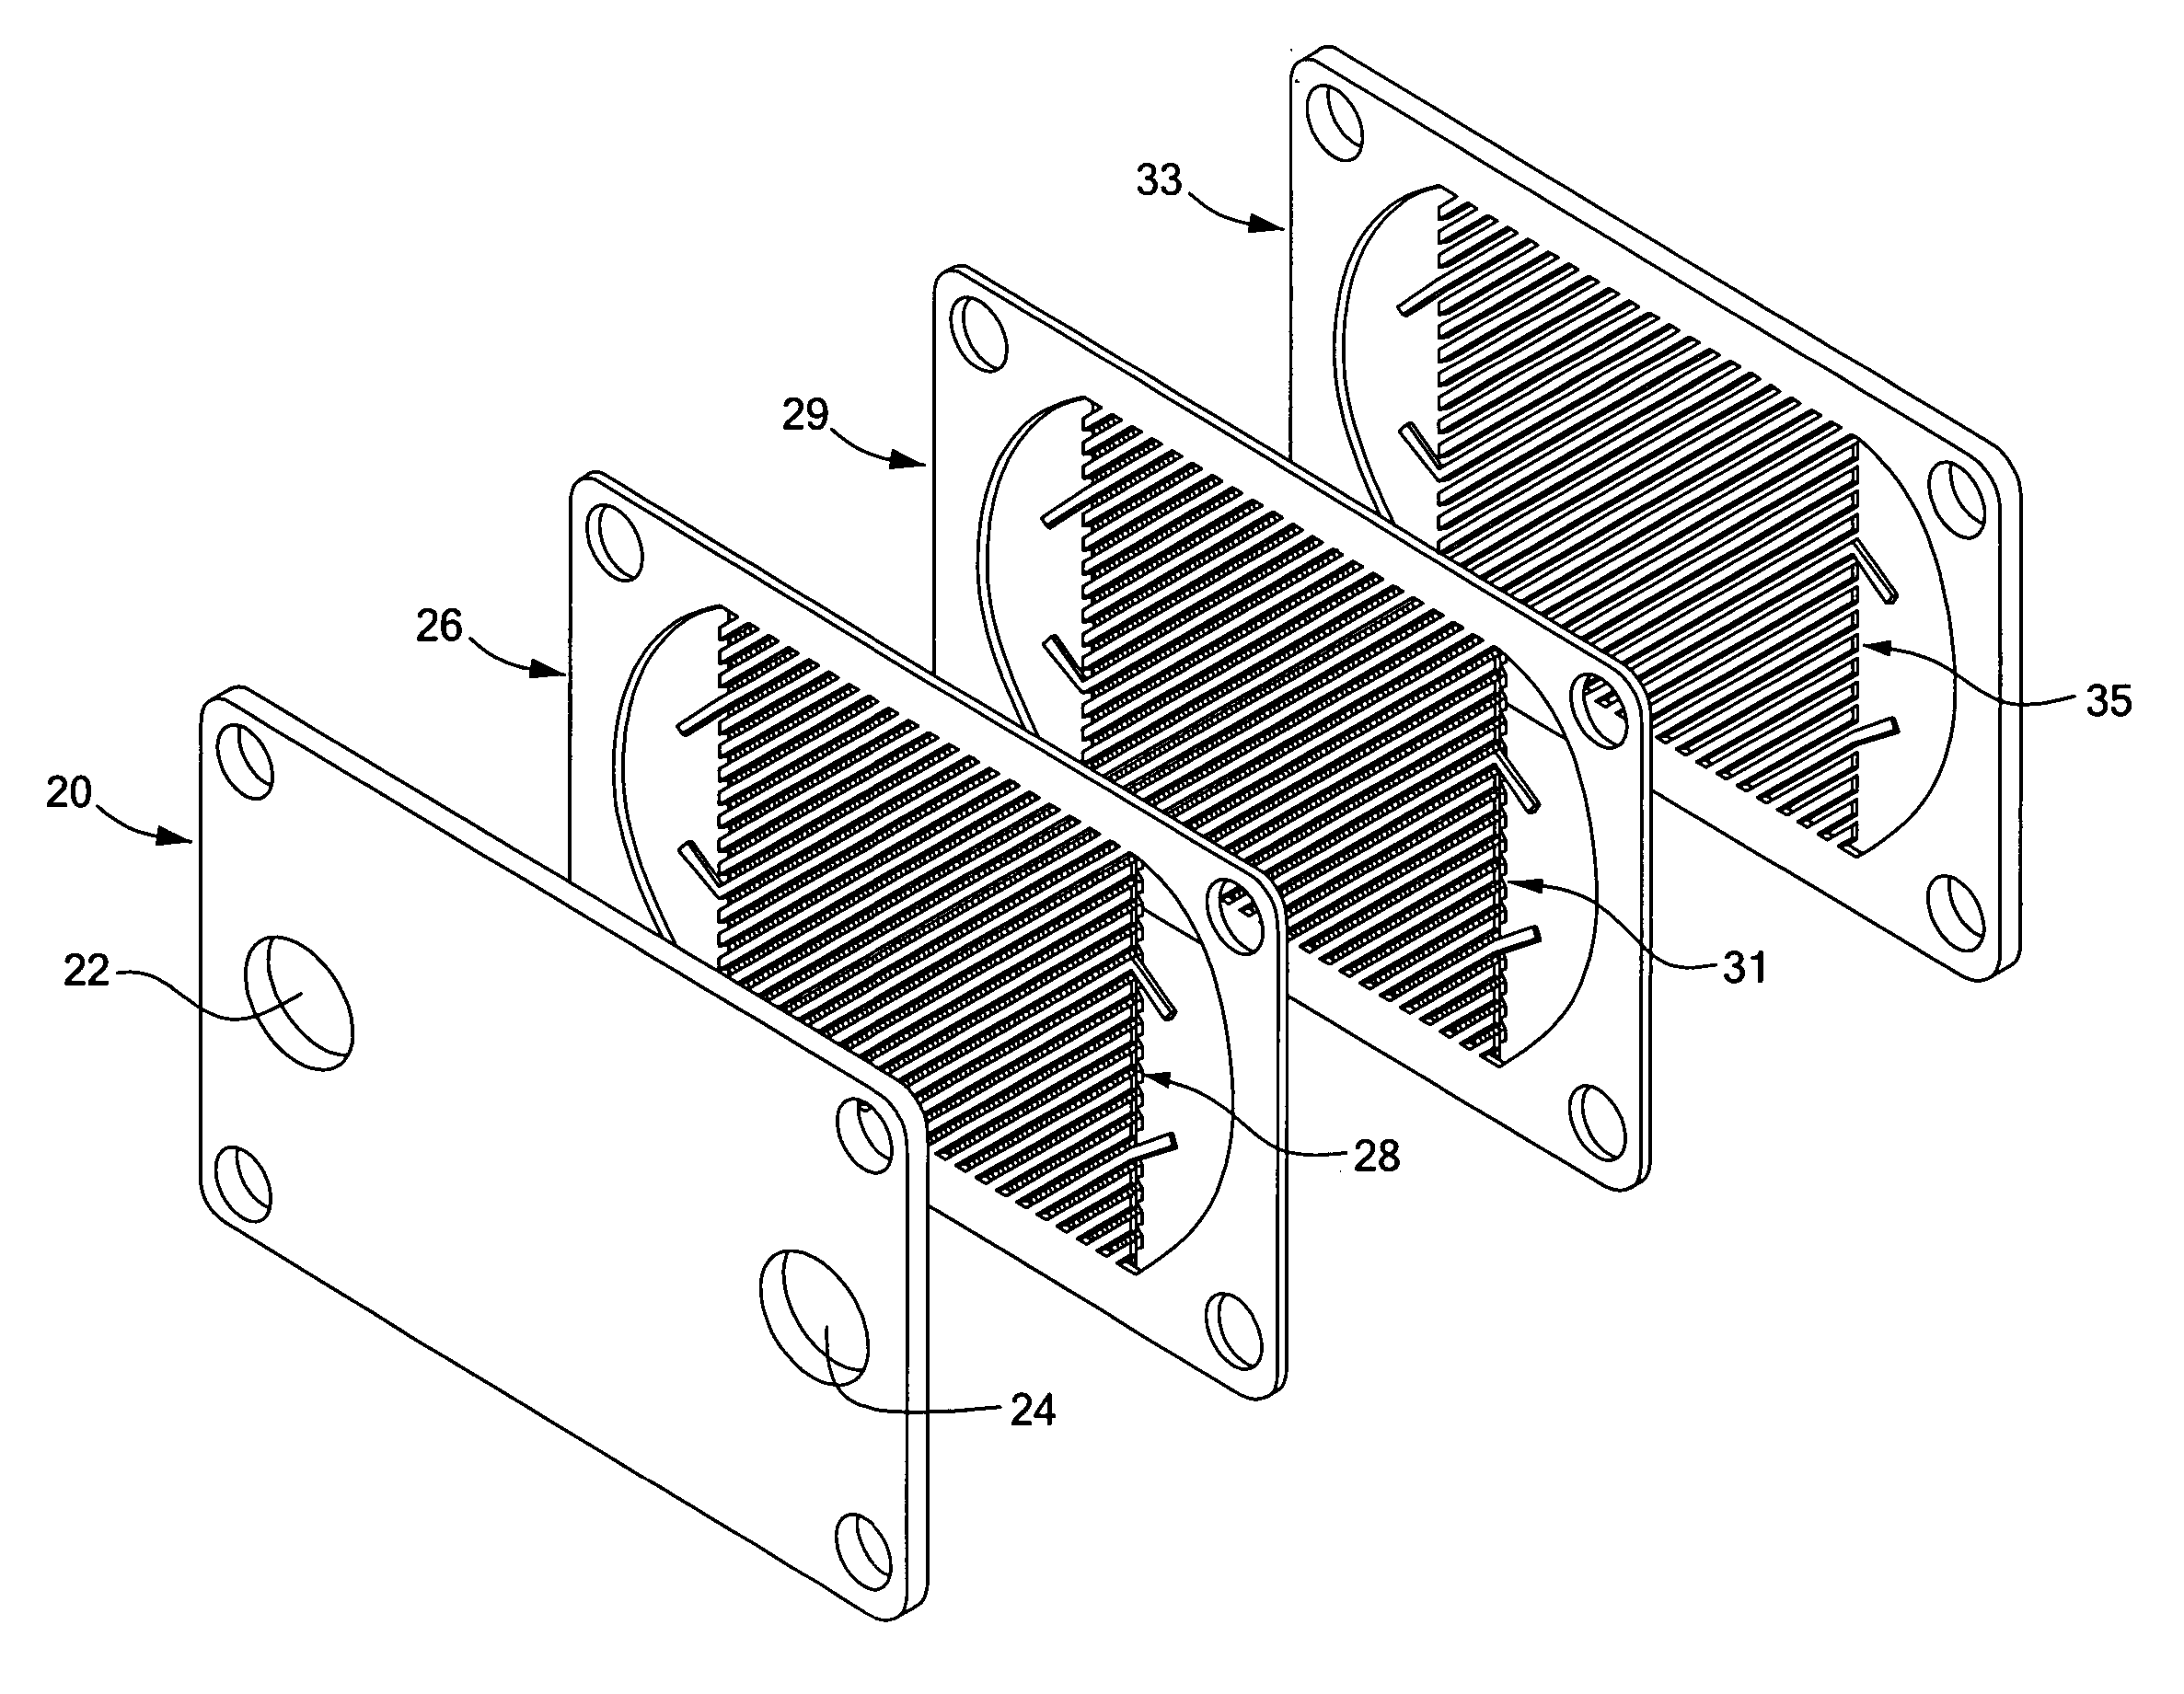 Contact cooling device